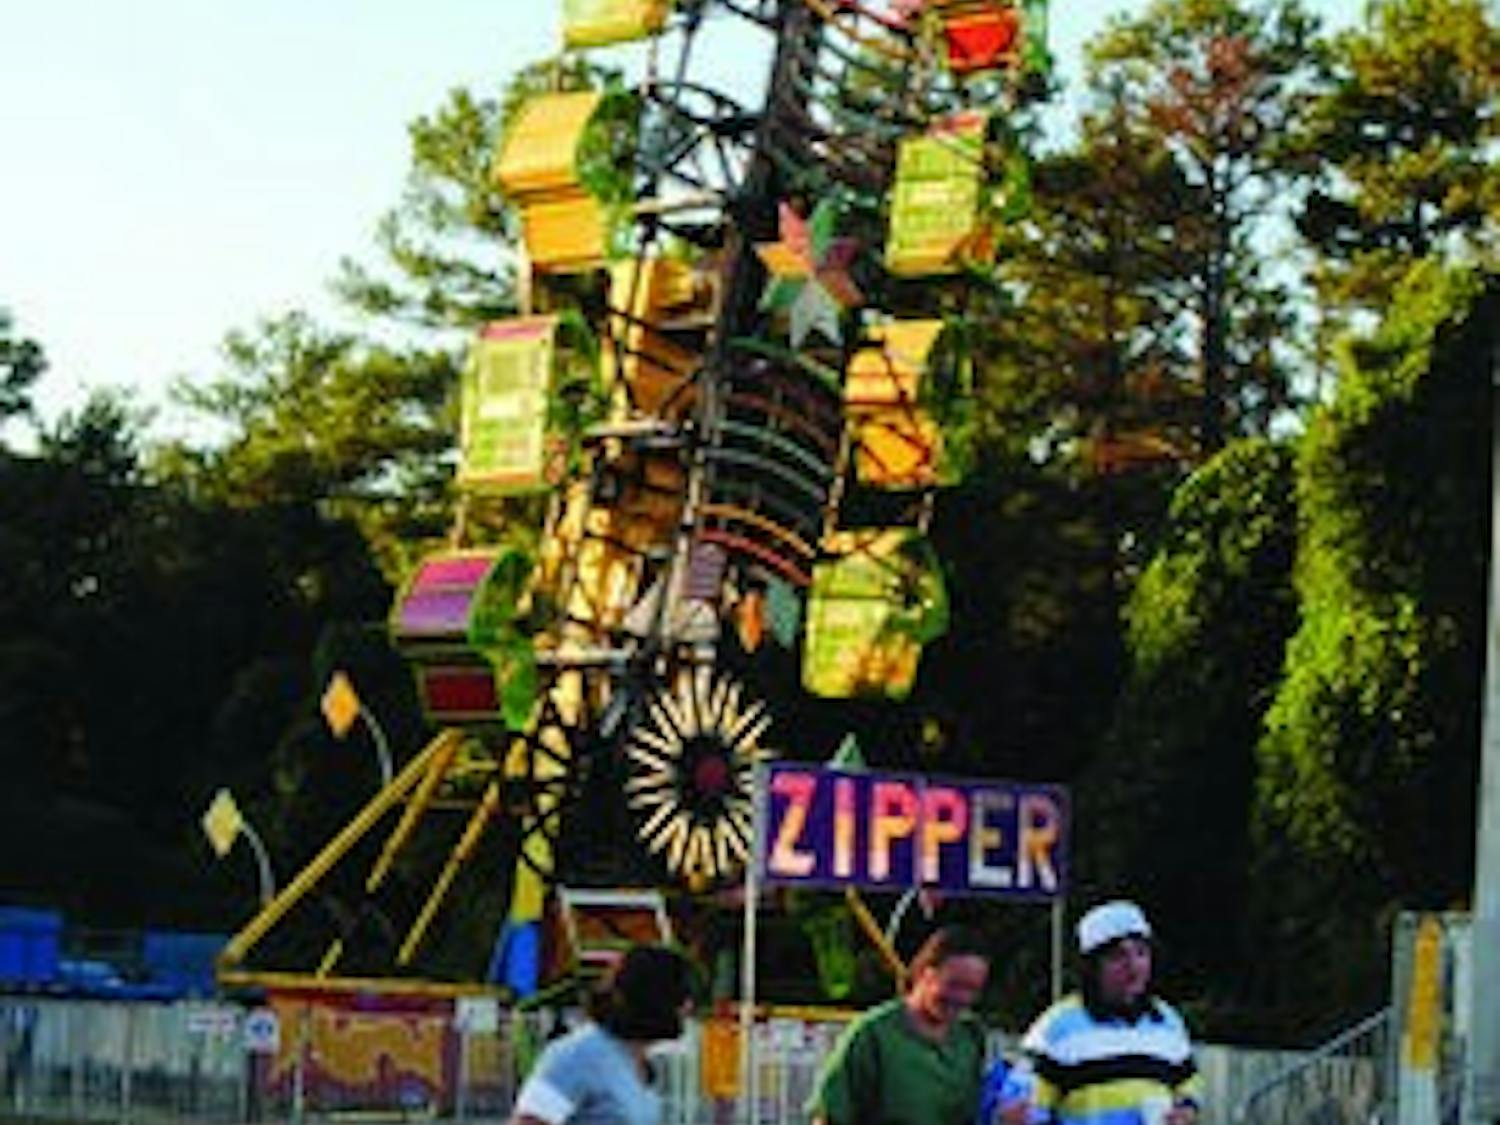 The Zipper is one of about 20 rides providing entertainment on the Midway for Lee County fair-goers. Unlimited ride passes are $20. (Maria Iampietro / PHOTO EDITOR)